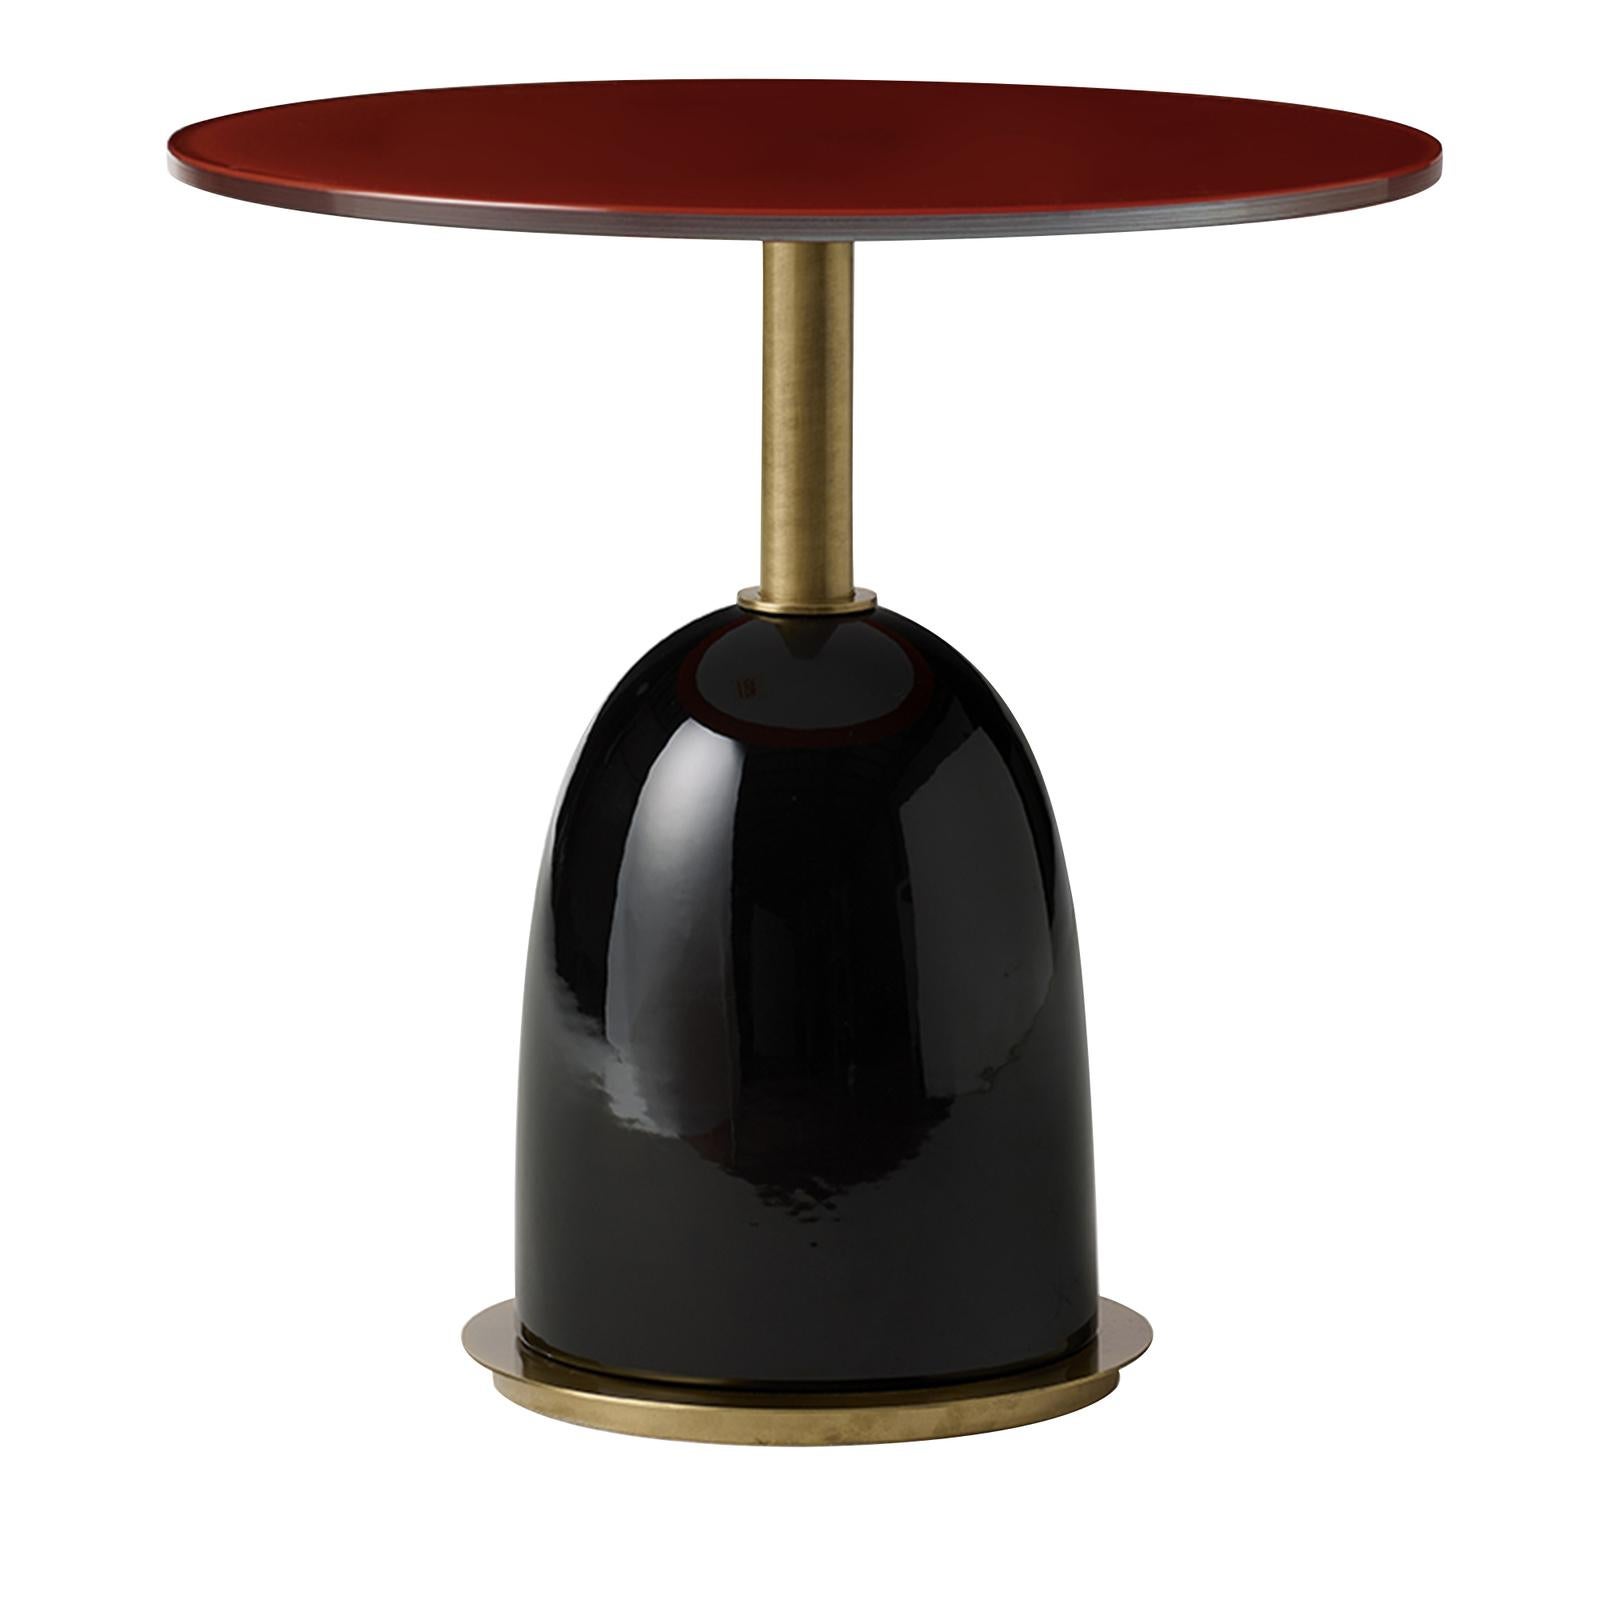 This side table features a structure in brass with a curved base covered in enamel-finished ceramic with a black color that strikingly contrasts with the vivid red of the round top crafted of crystal. The top is adorned with a series of square